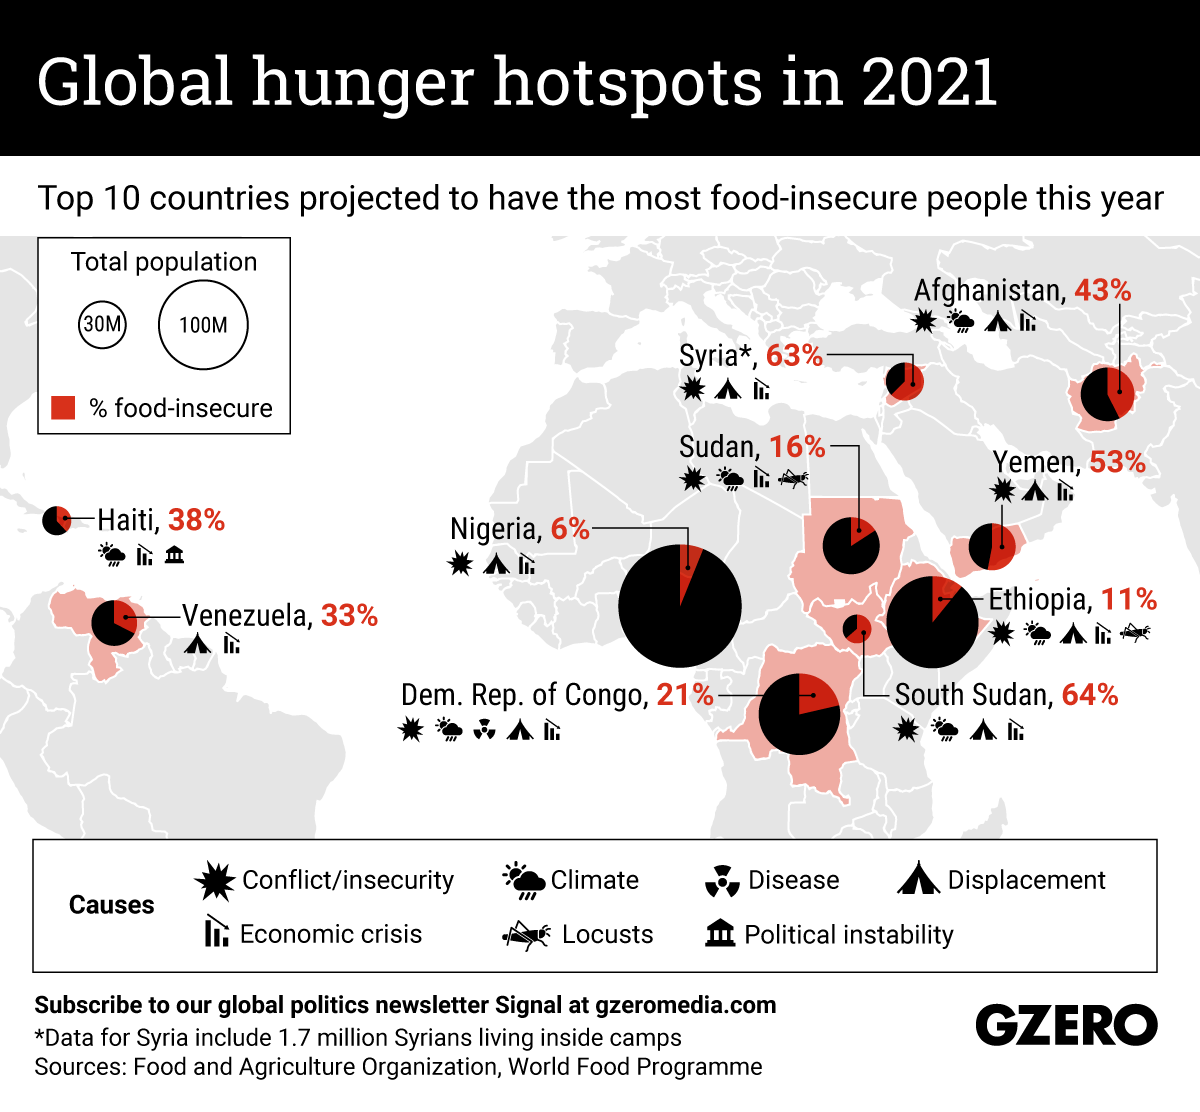 The Graphic Truth: Global hunger hotspots in 2021